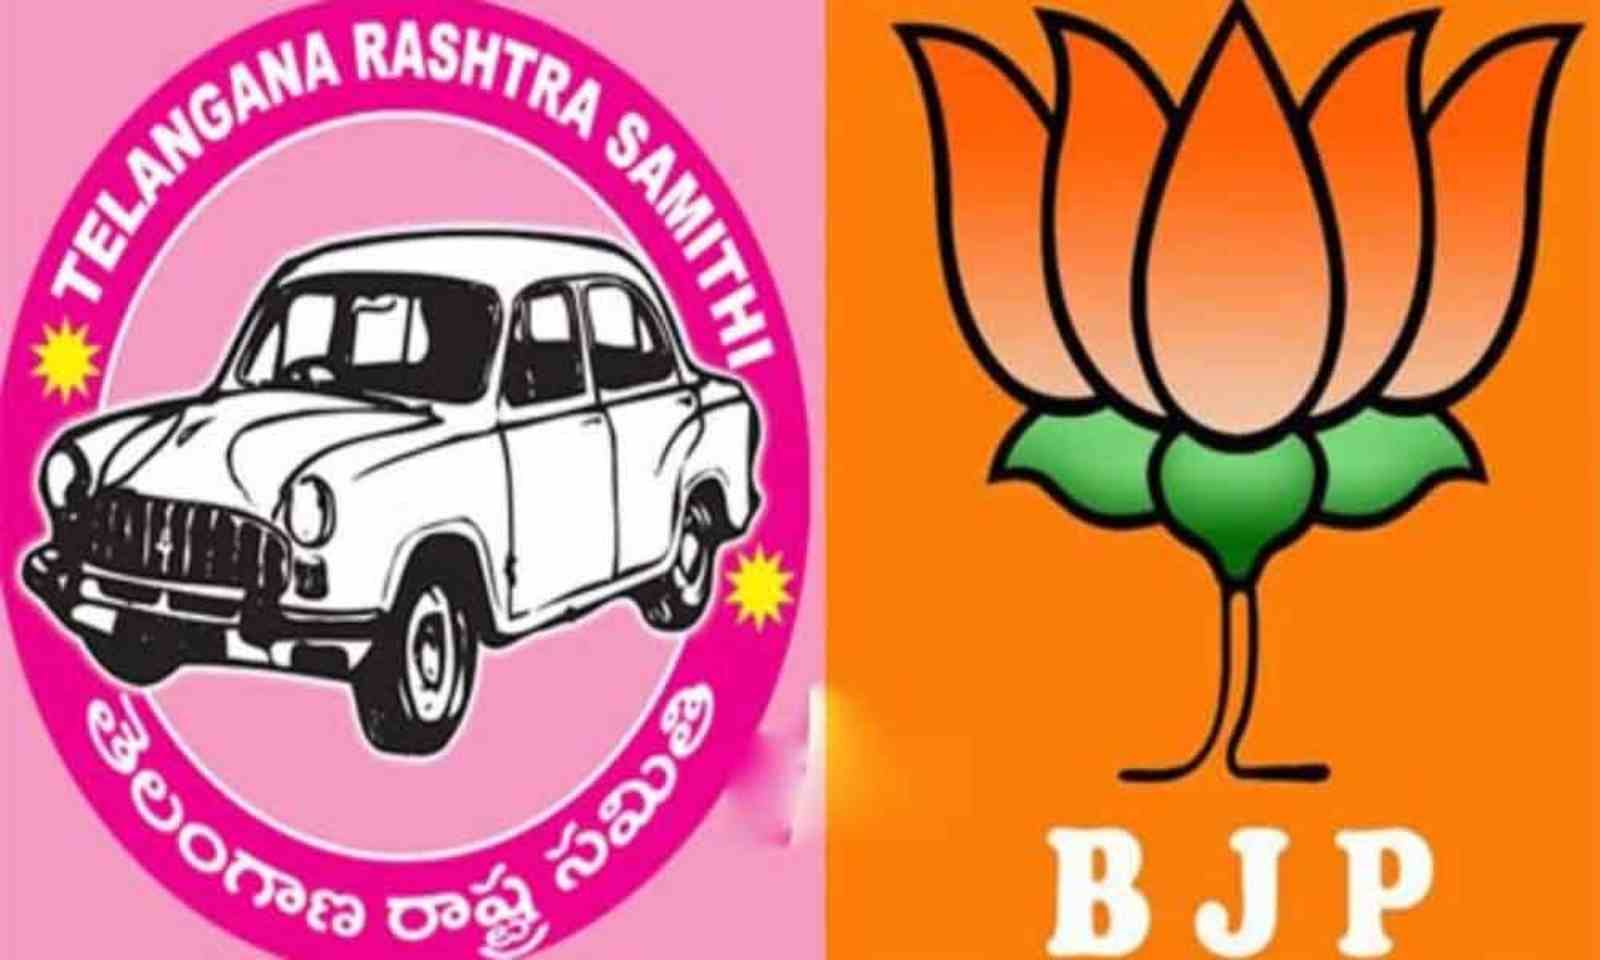 BJP has early lead, but TRS slowly making up